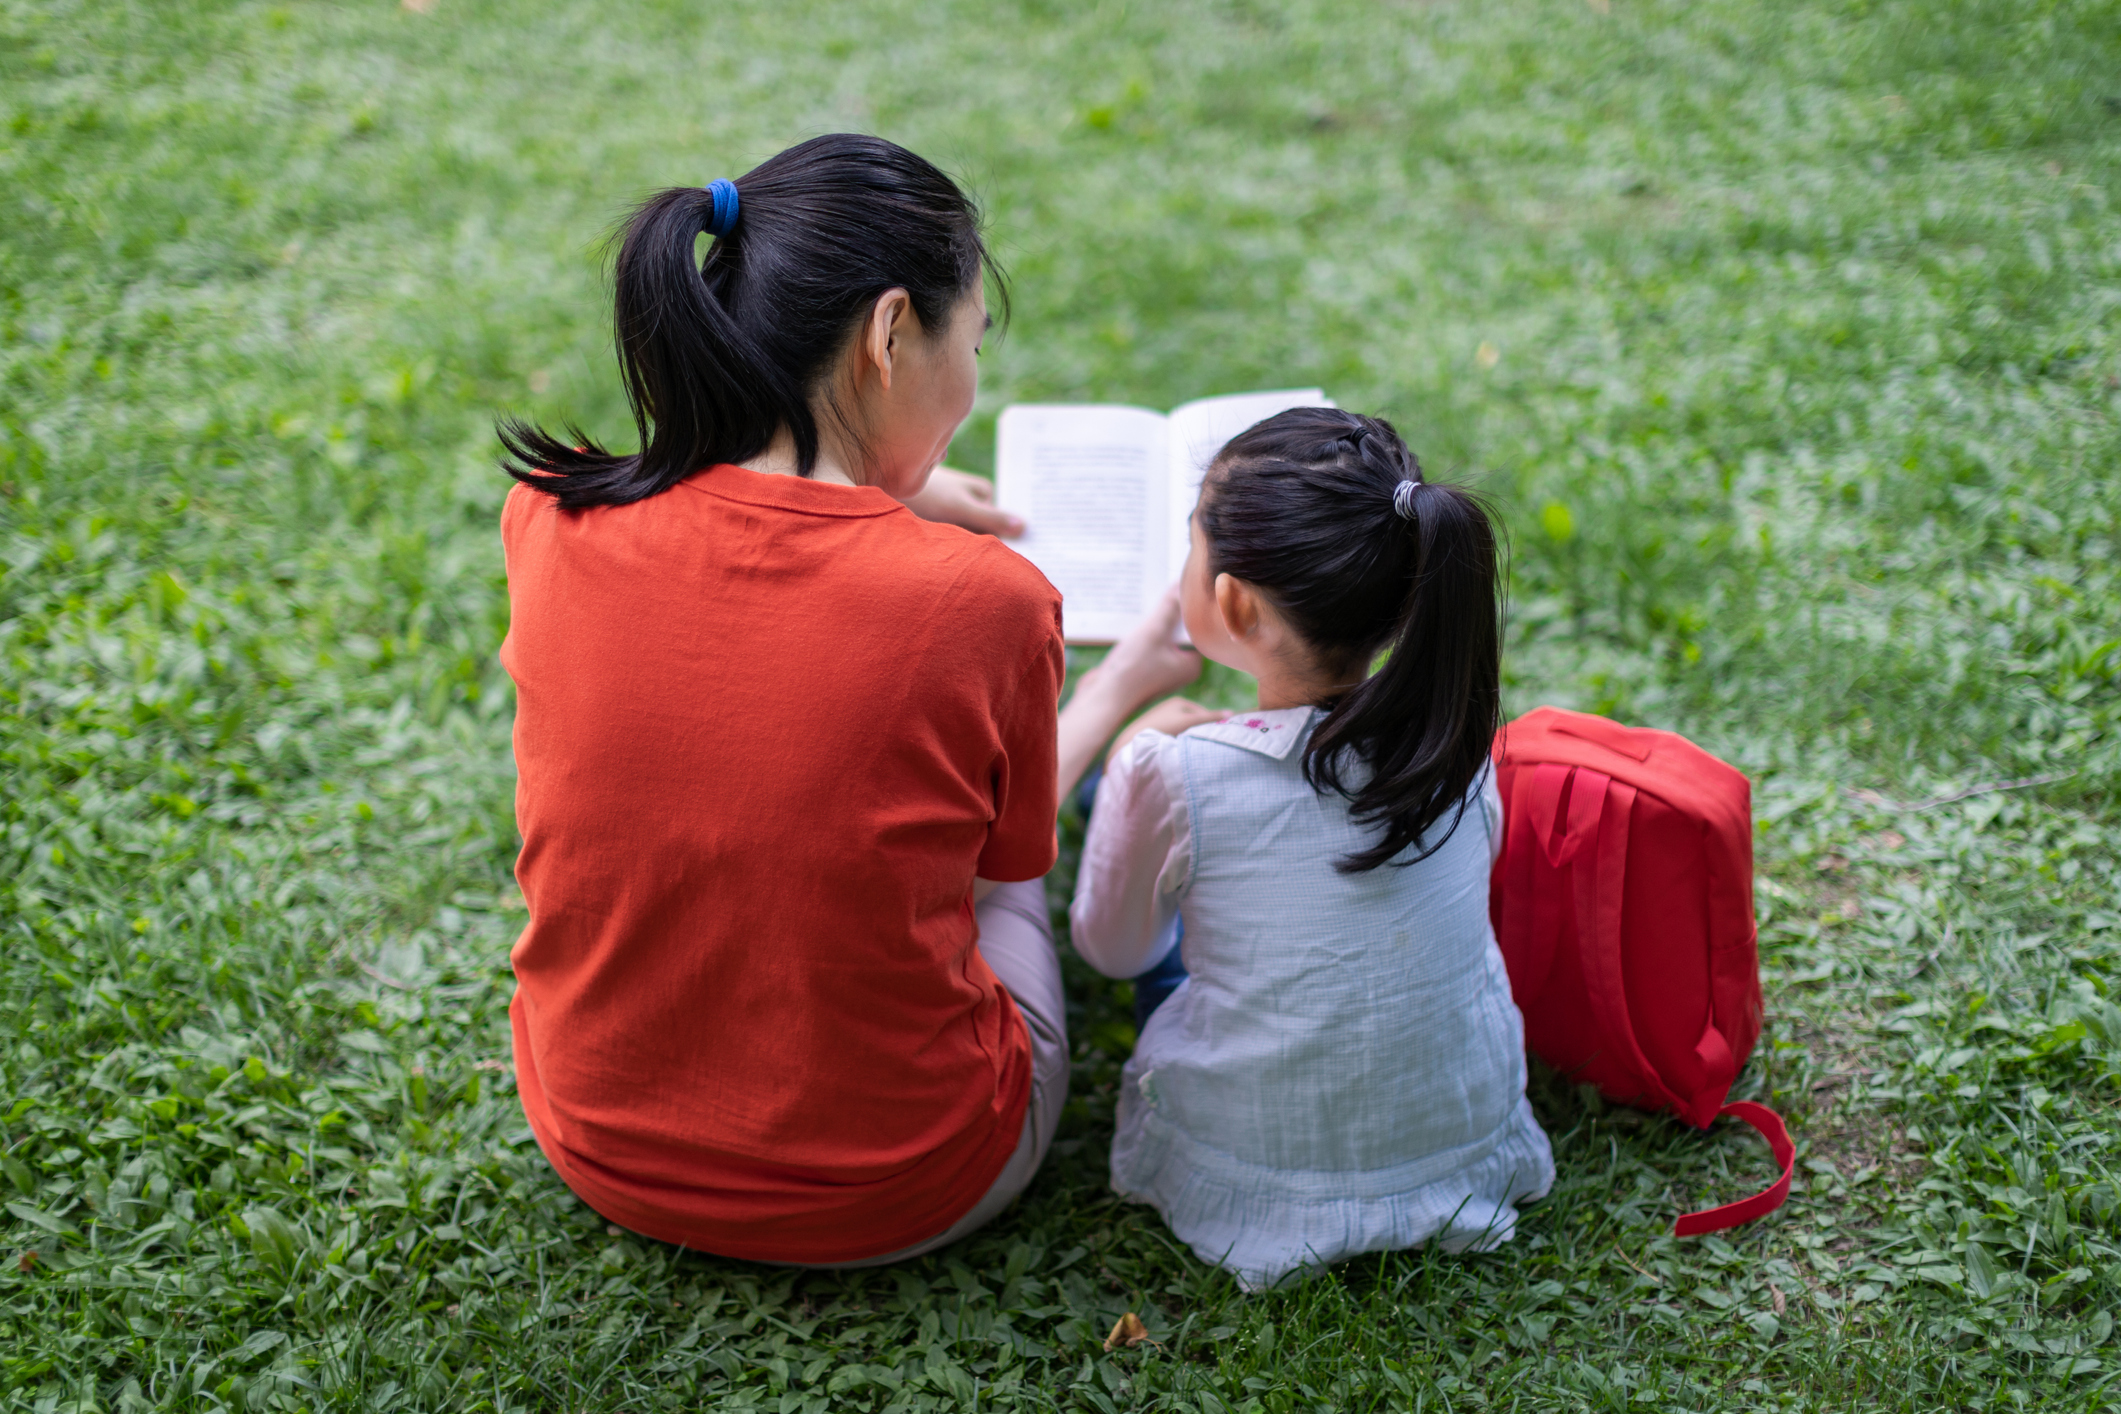 how to get your child to love reading